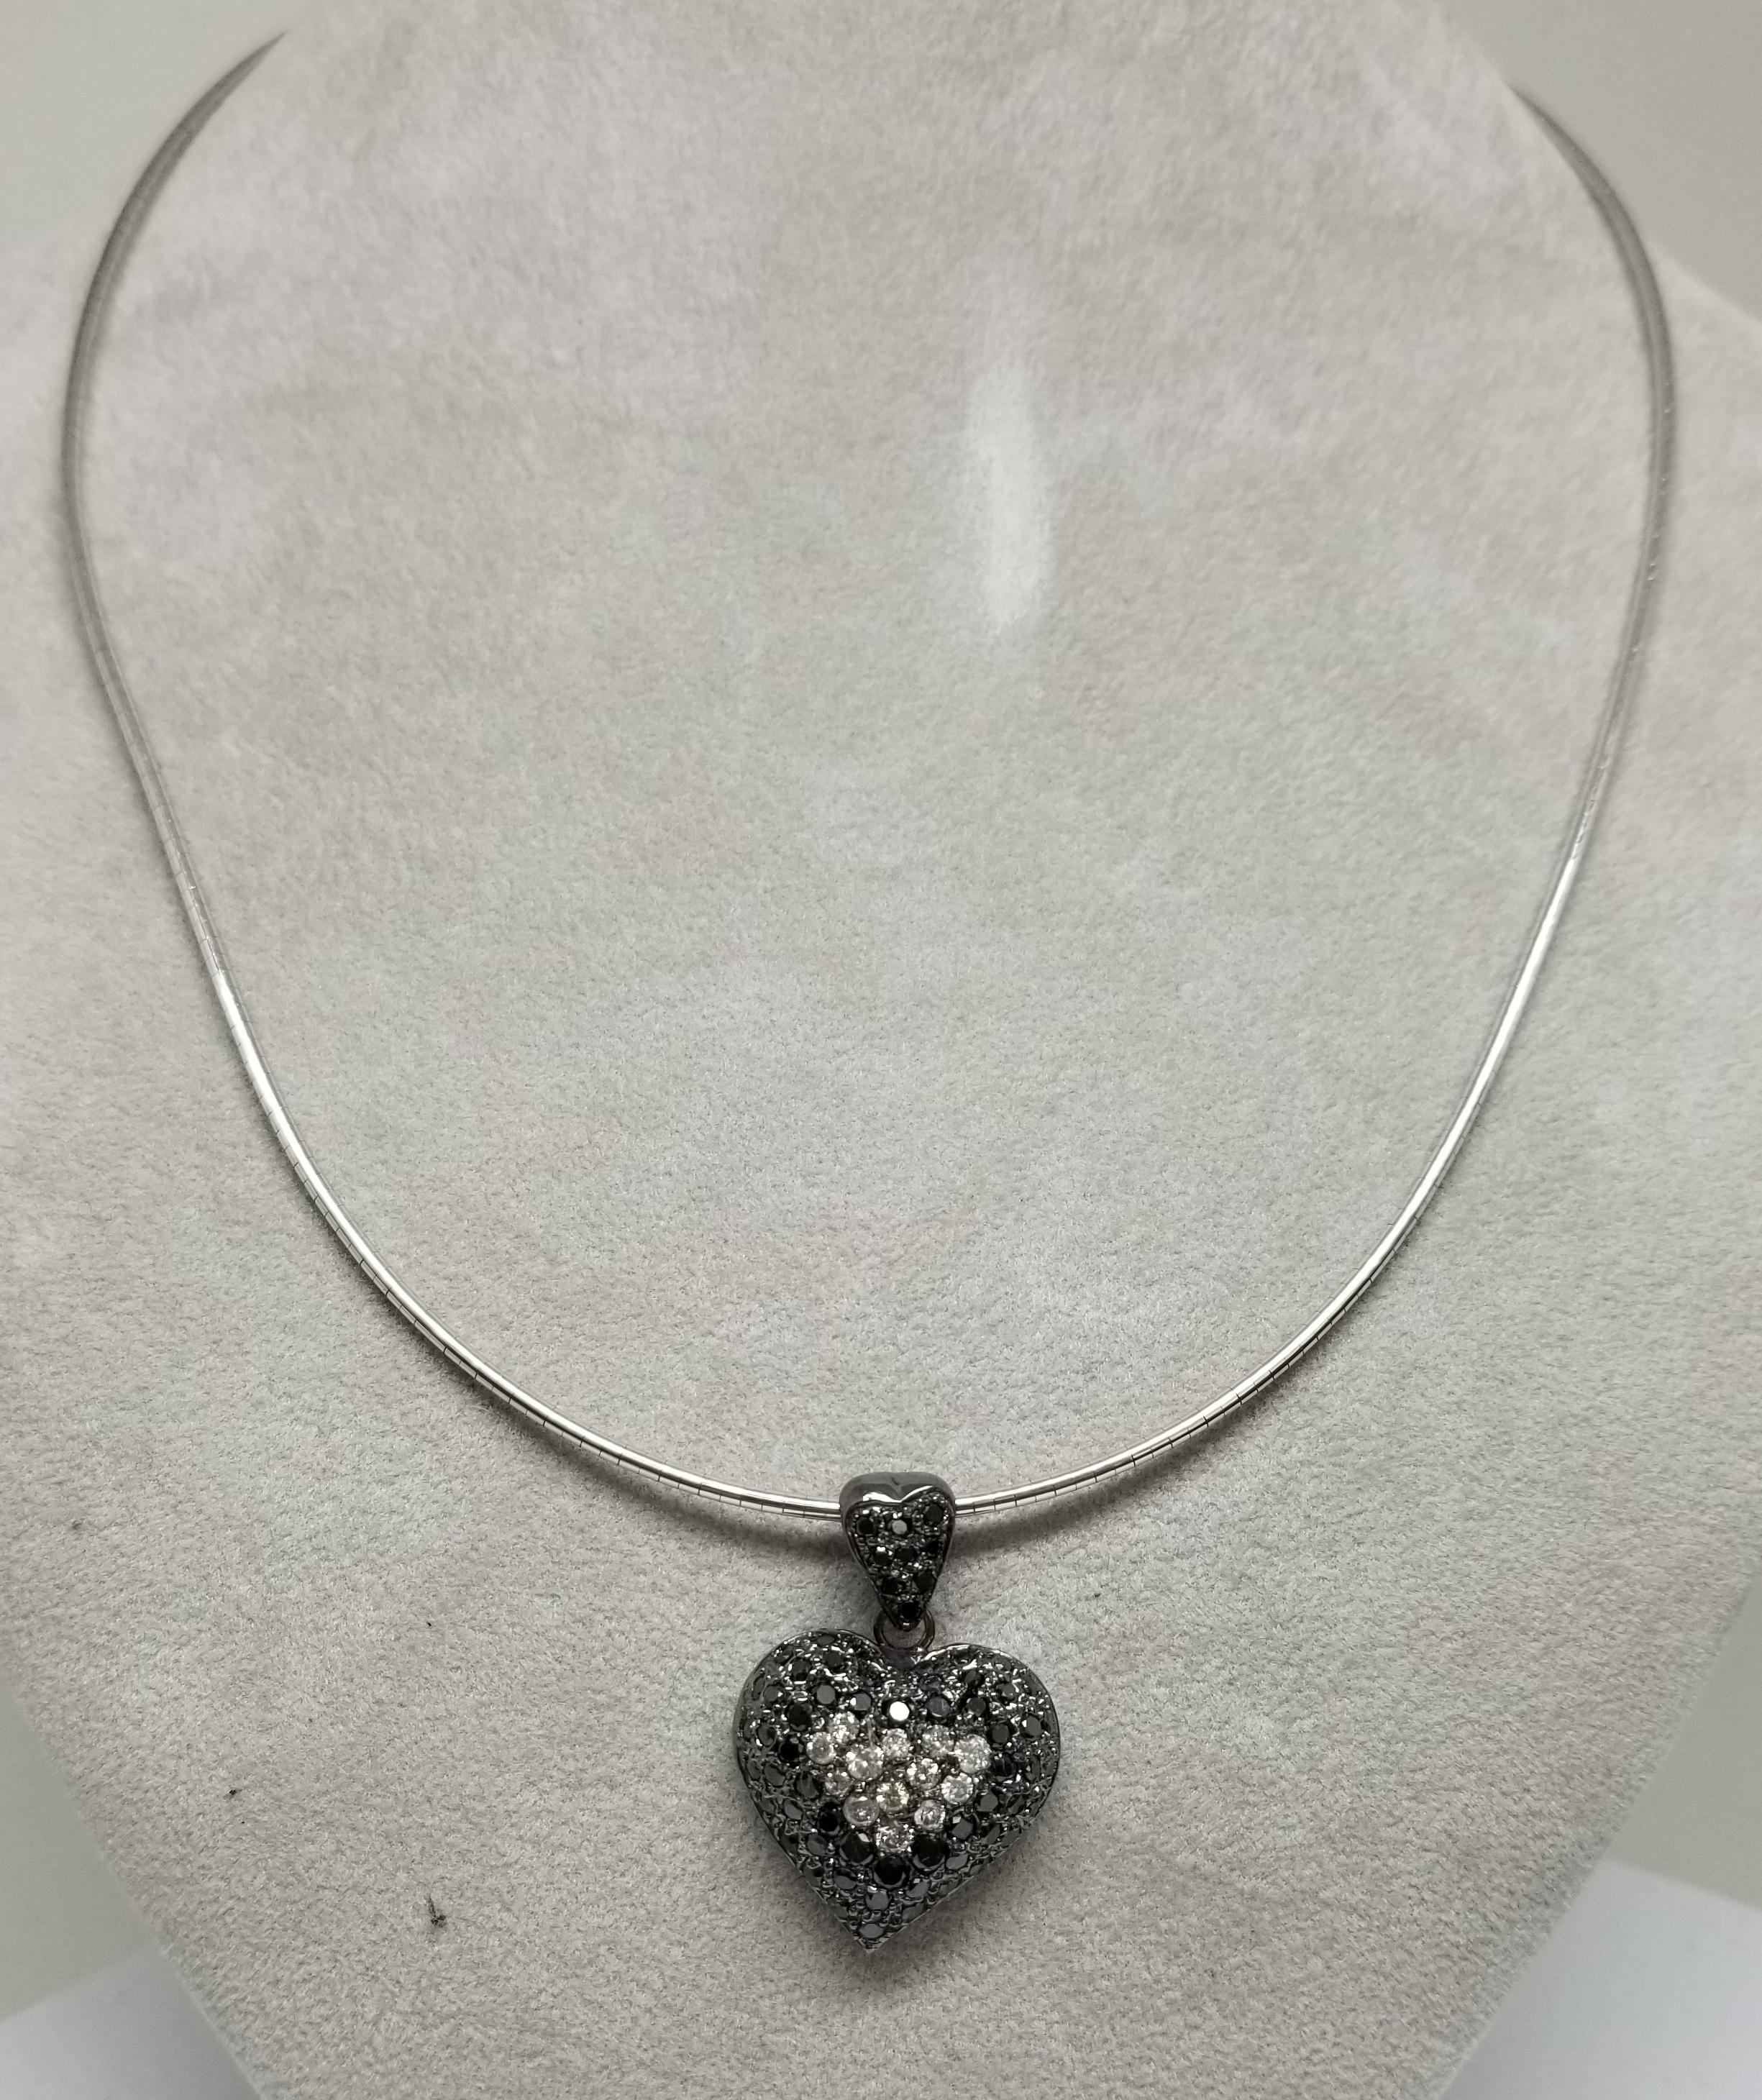 14 karat White and Black Diamond Heart pendant, containing 23 round full cut diamonds weighing .70pts. and 67 round full cut black diamonds weighing 2.30cts.  with a black antiquing on a 18 inch chain.